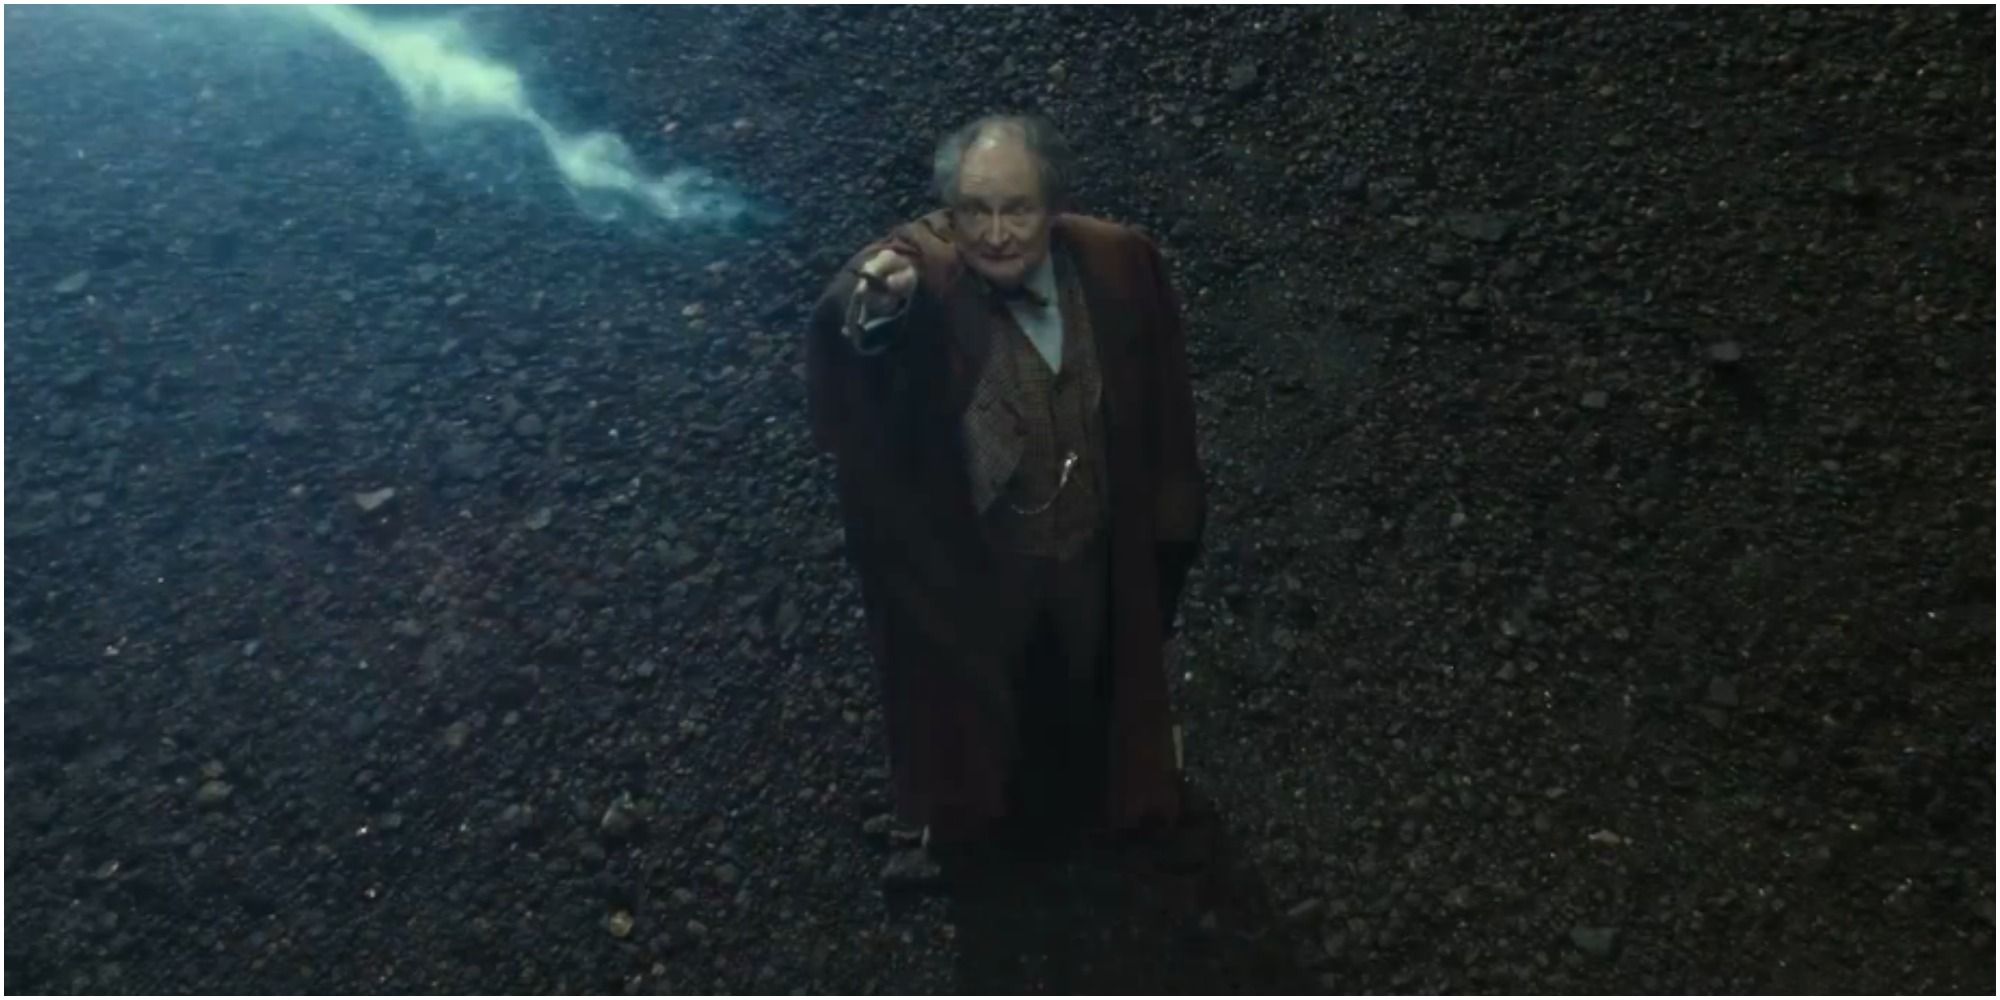 A screenshot of Professor Horace Slughorn casting a spell in Harry Potter and the Deathly Hallows - Part 2